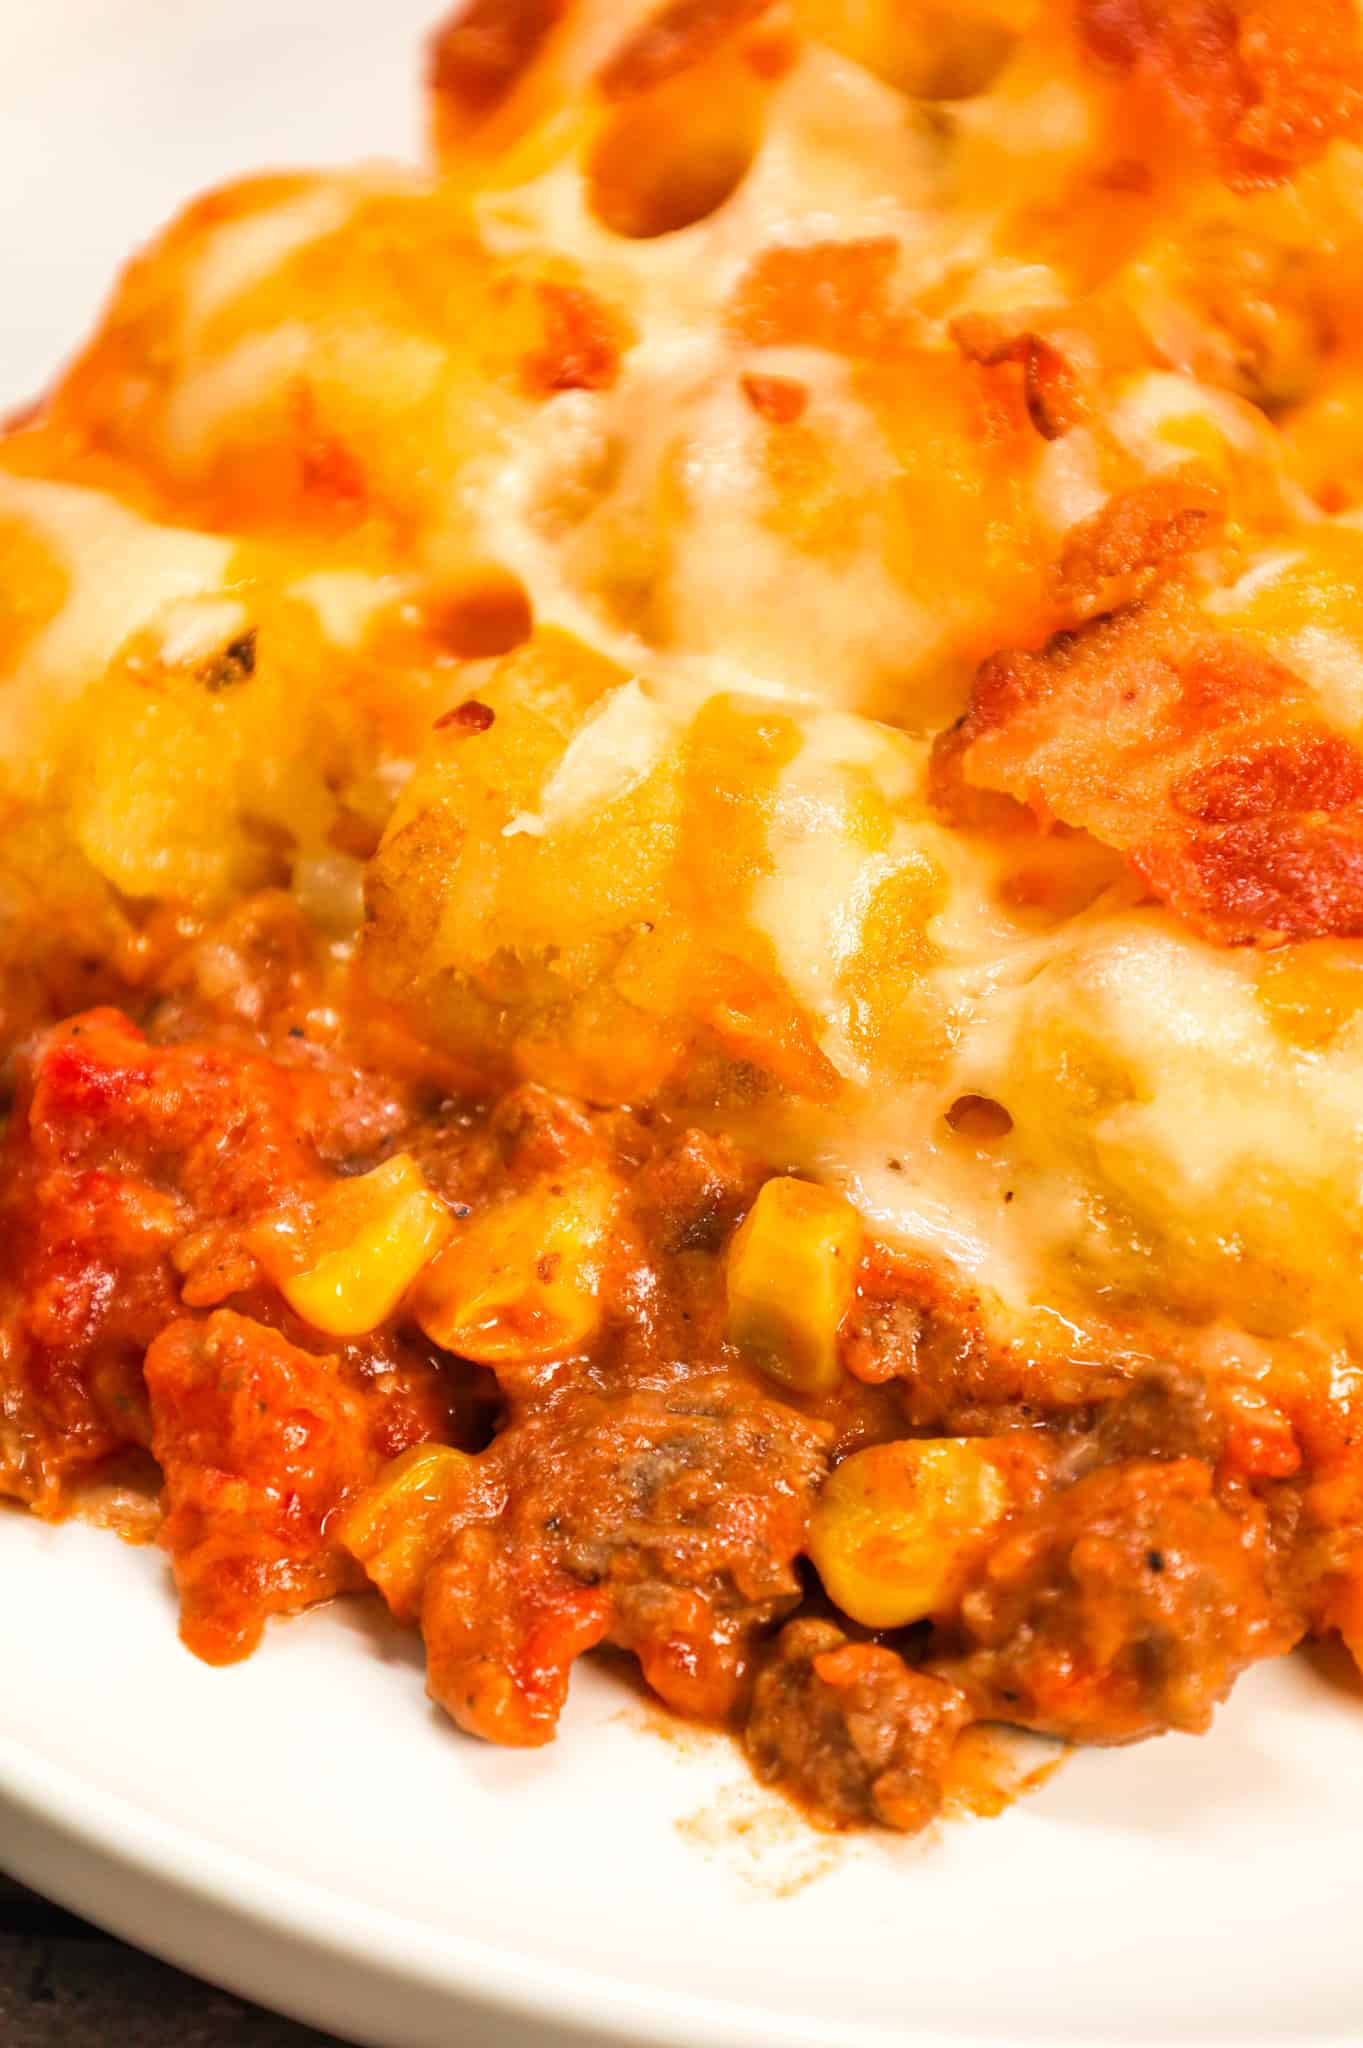 Cowboy Casserole is an easy ground beef casserole recipe loaded with diced tomatoes, corn, tater tots, shredded cheese and bacon.